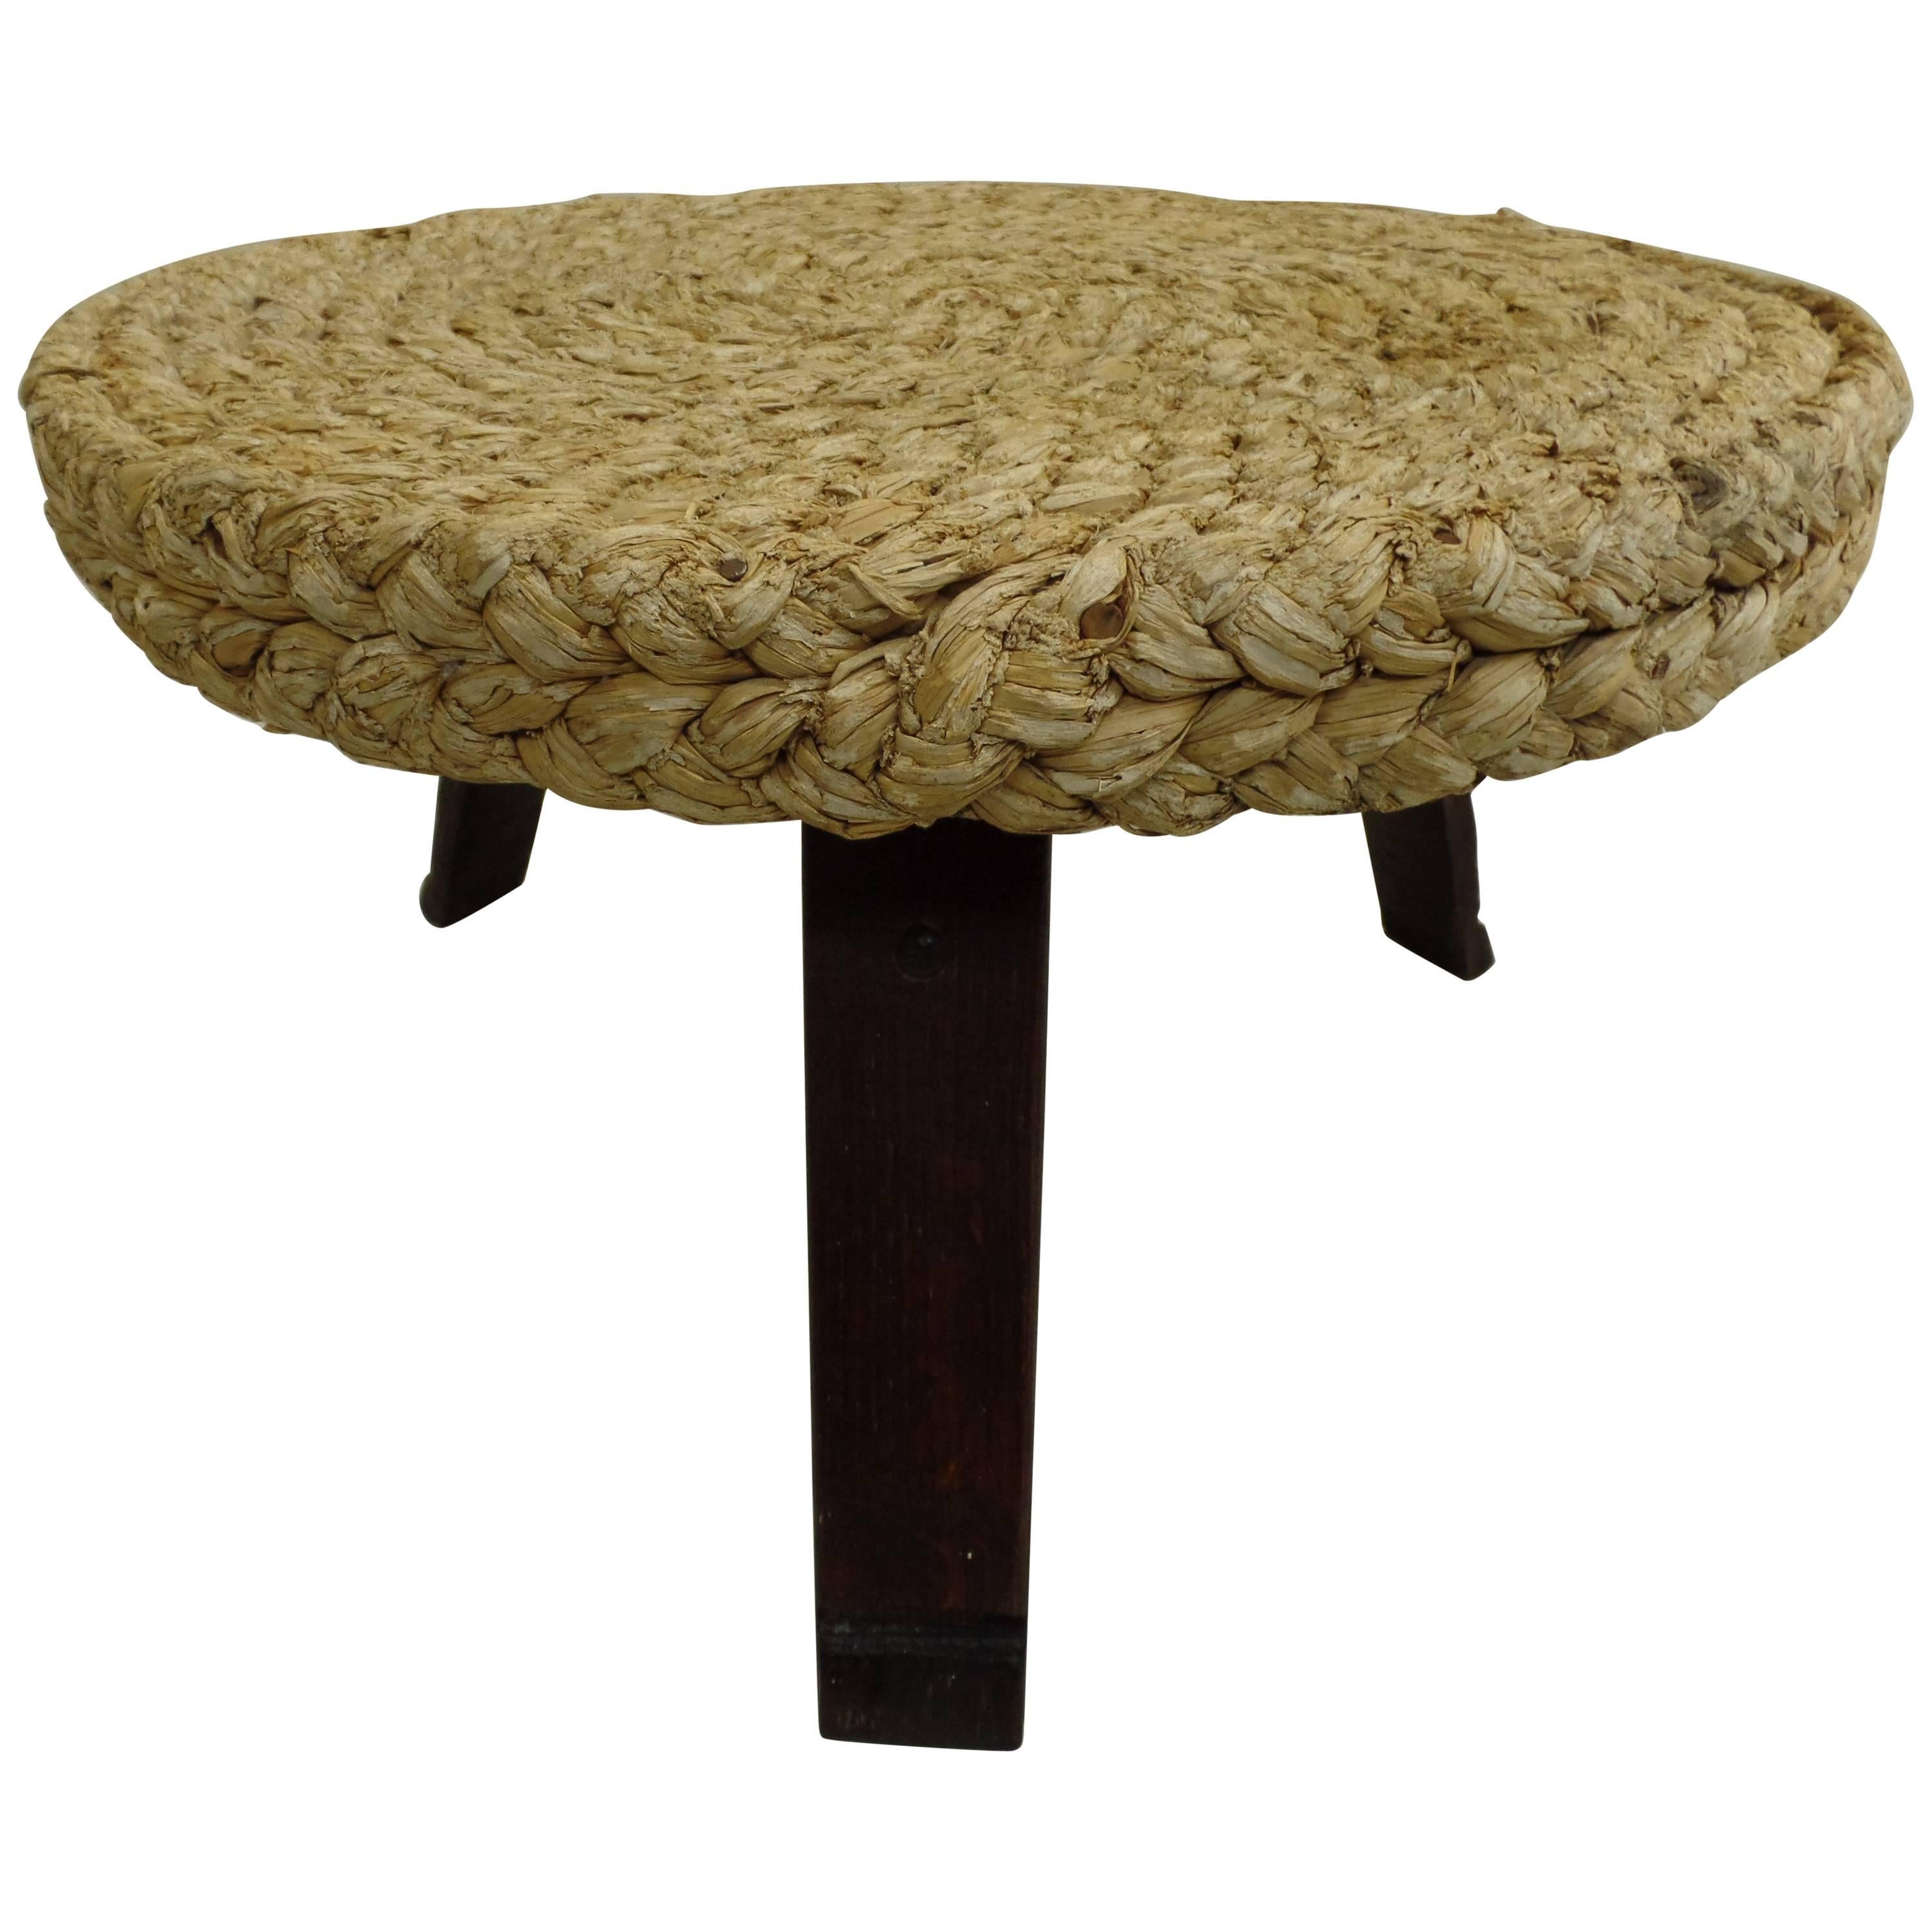 French Mid-Century Modern Woven Rush Round Coffee Table by Audoux & Minet, 1940